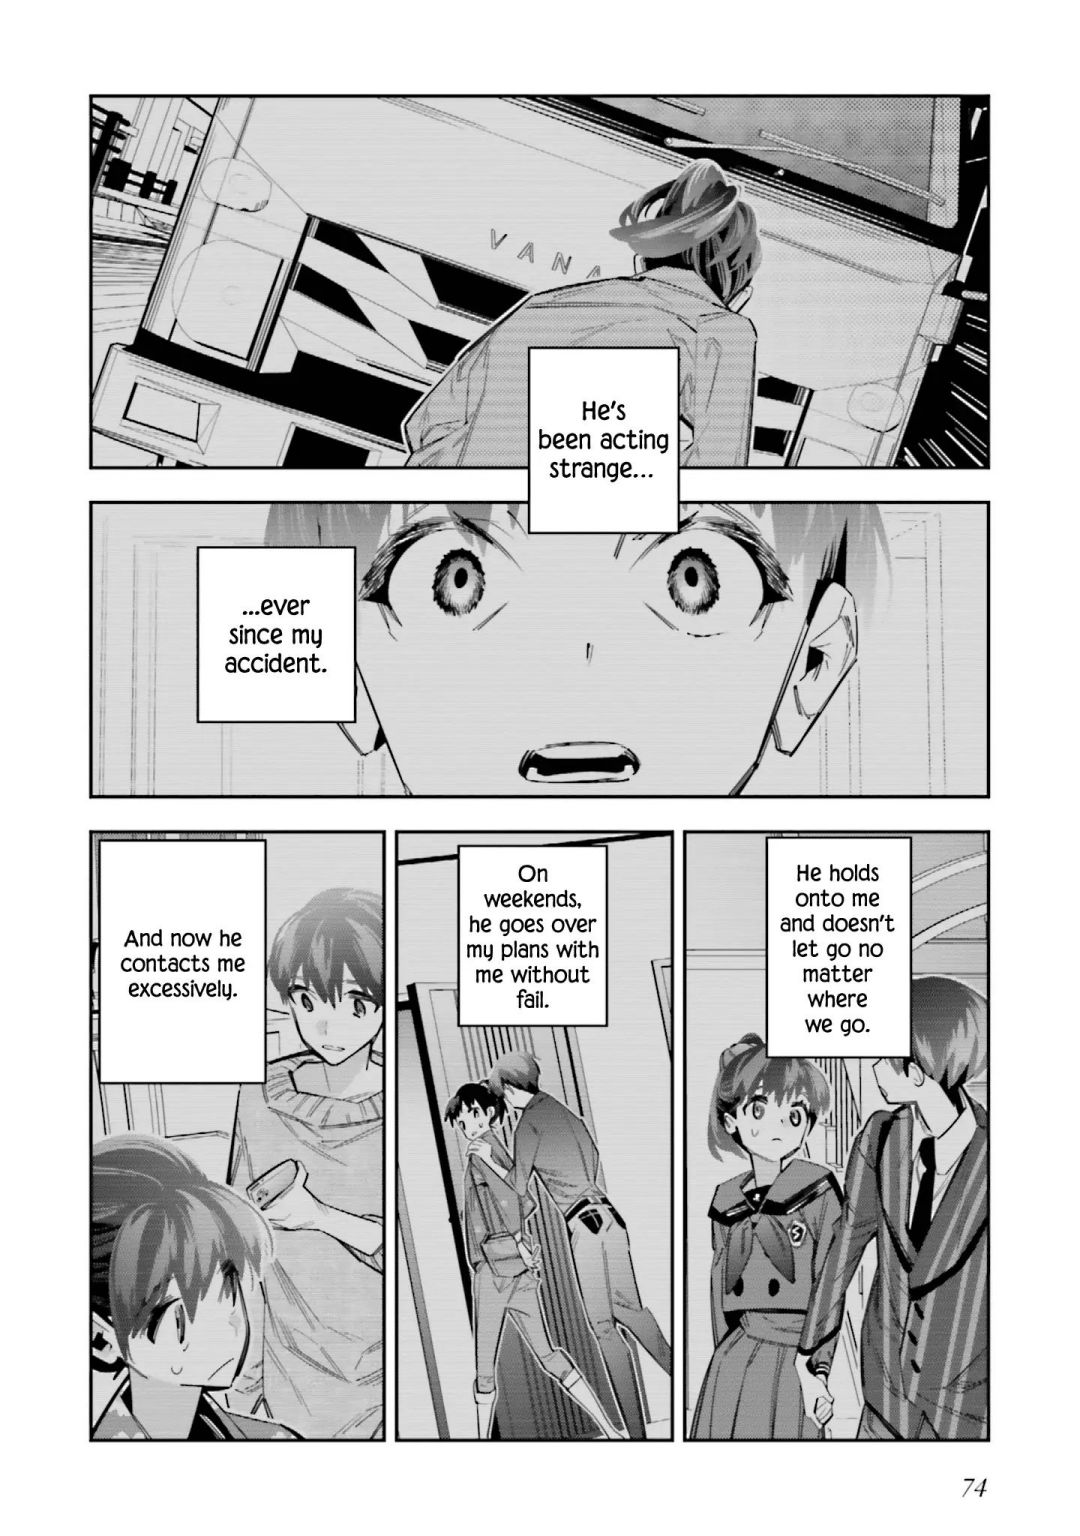 I Reincarnated As The Little Sister Of A Death Game Manga’S Murd3R Mastermind And Failed - Page 4